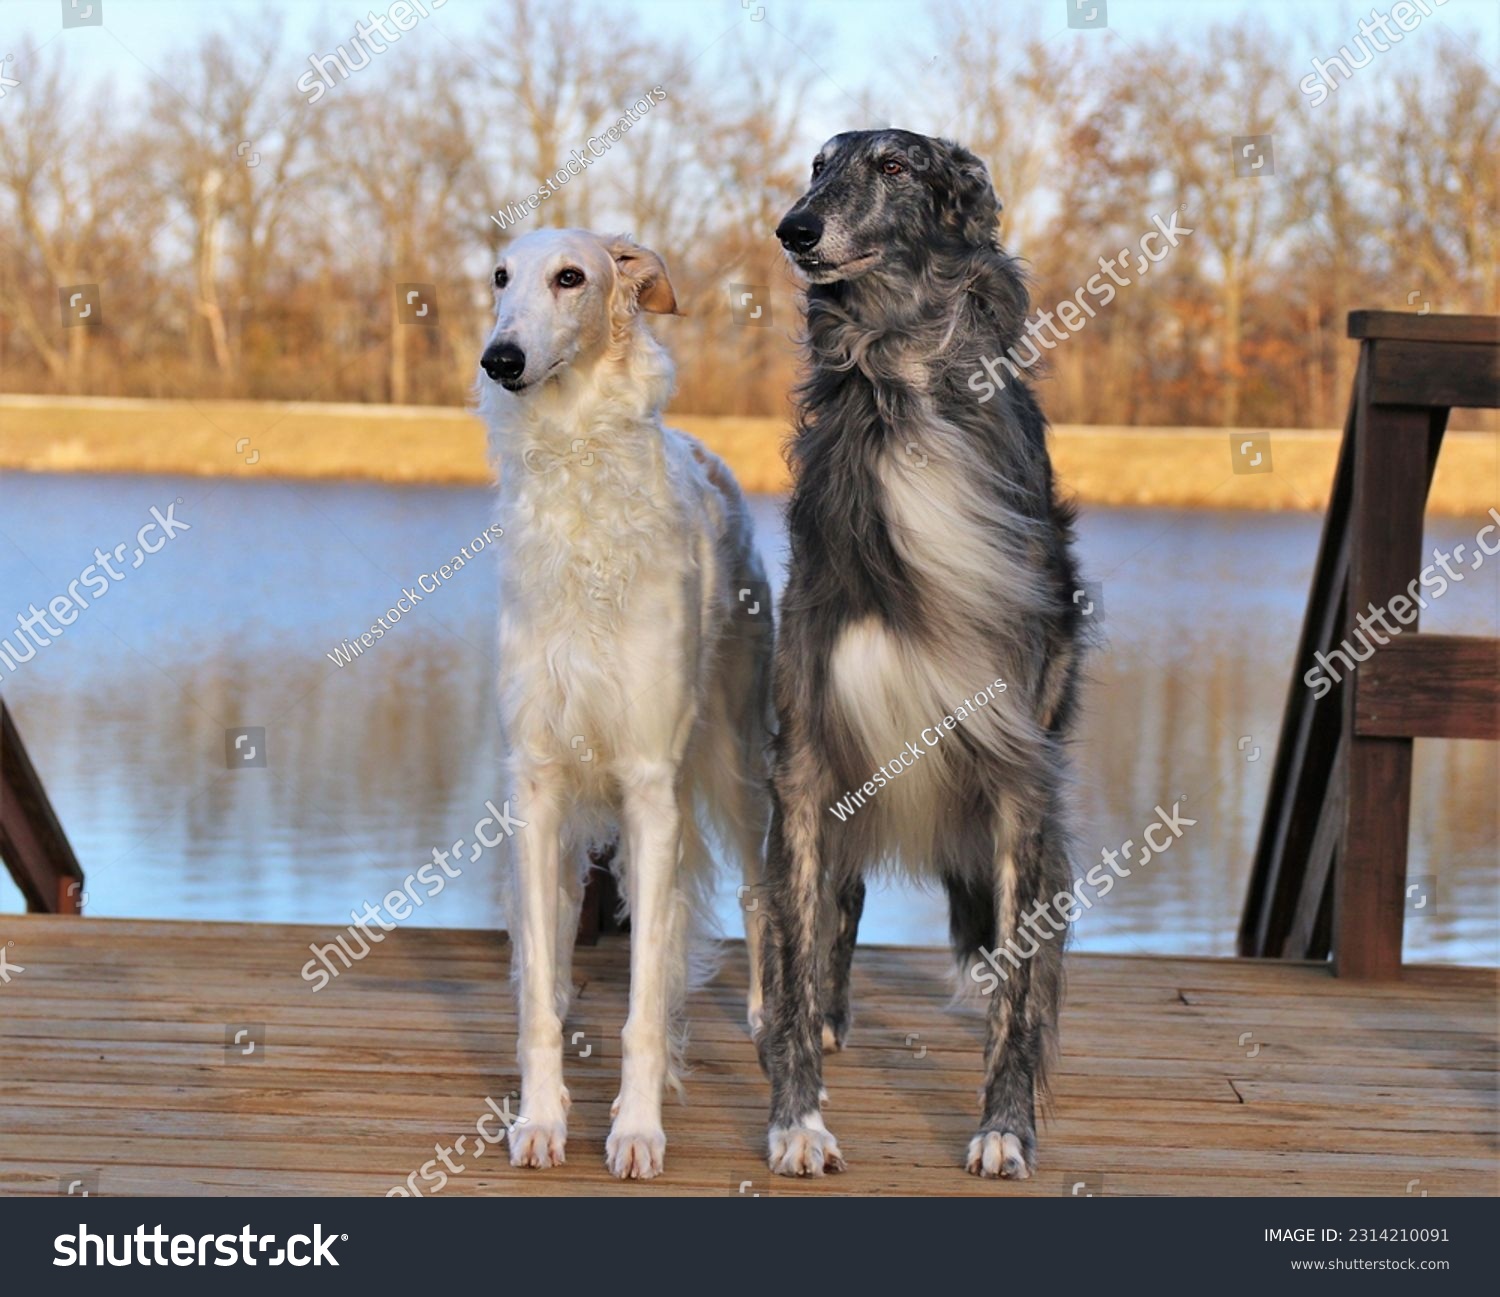 An outdoor scene of two Borzoi dogs against a tranquil body of water standing on a wooden dock #2314210091